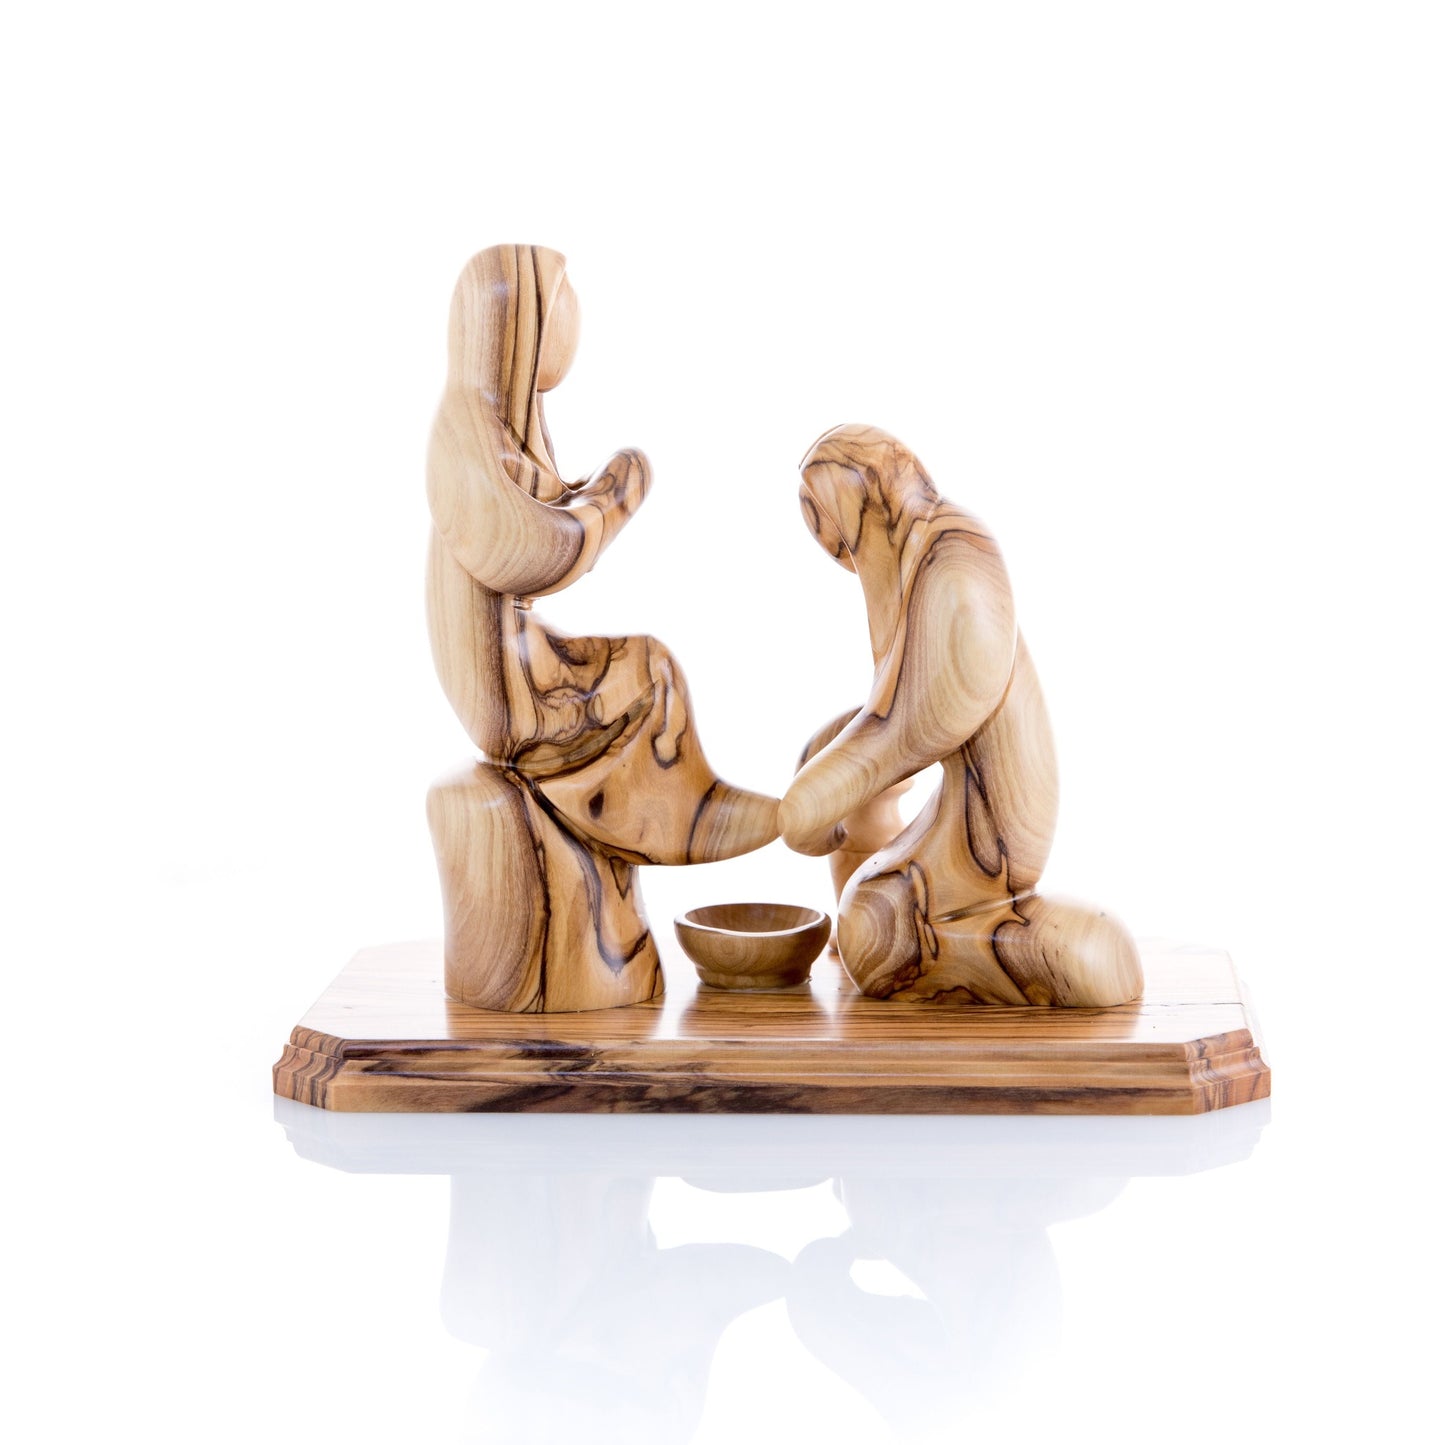 "Jesus Washing the Feet" 7.1" Wooden Carving Abstract